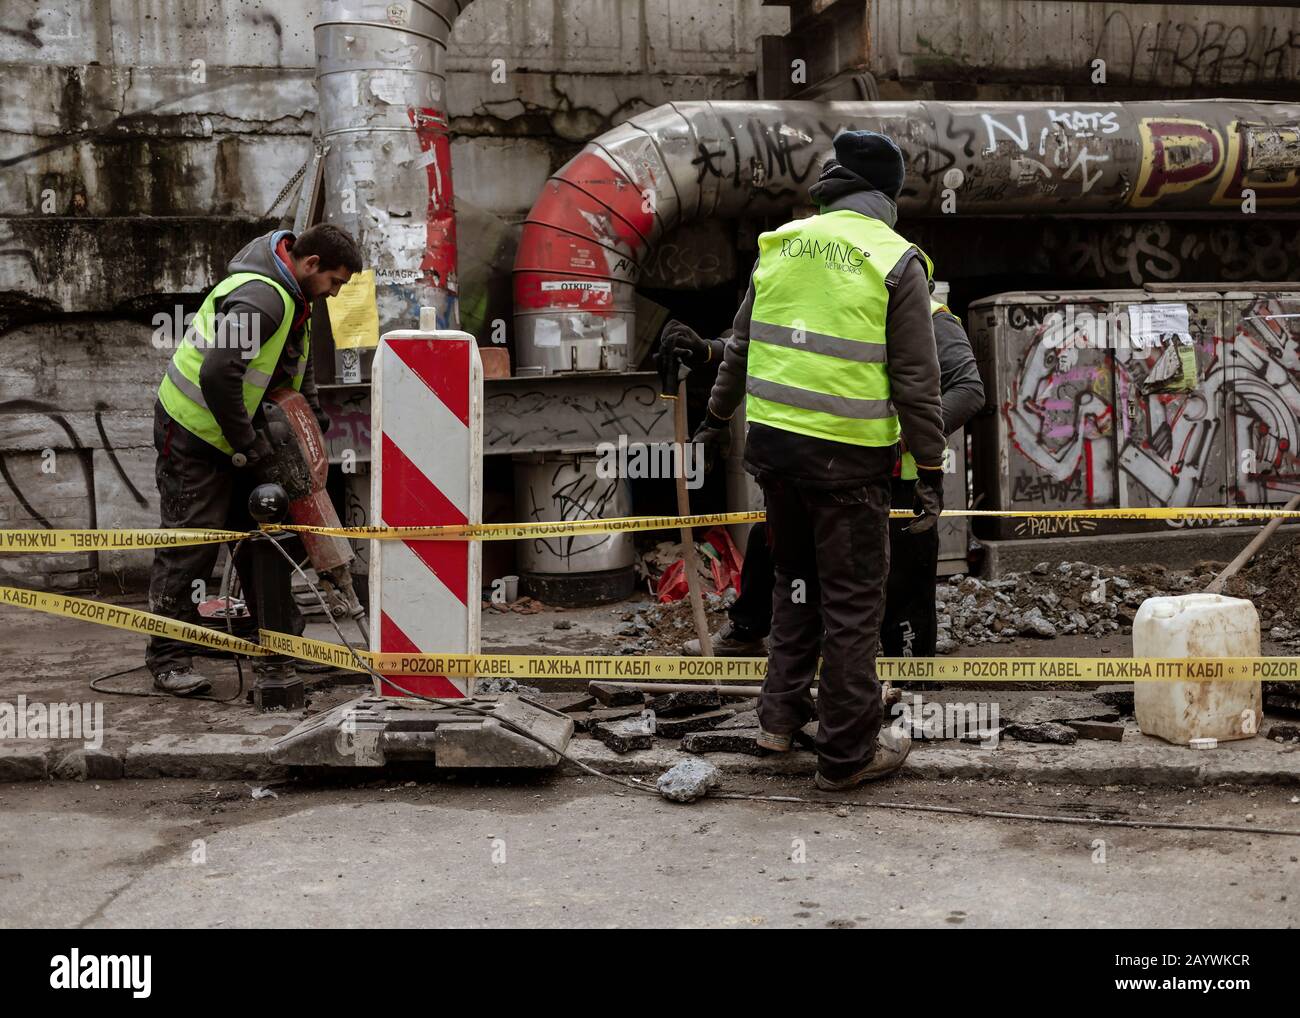 Belgrade, Serbia, Feb 7, 2020: Construction workers drilling and digging concrete sidewalk Stock Photo